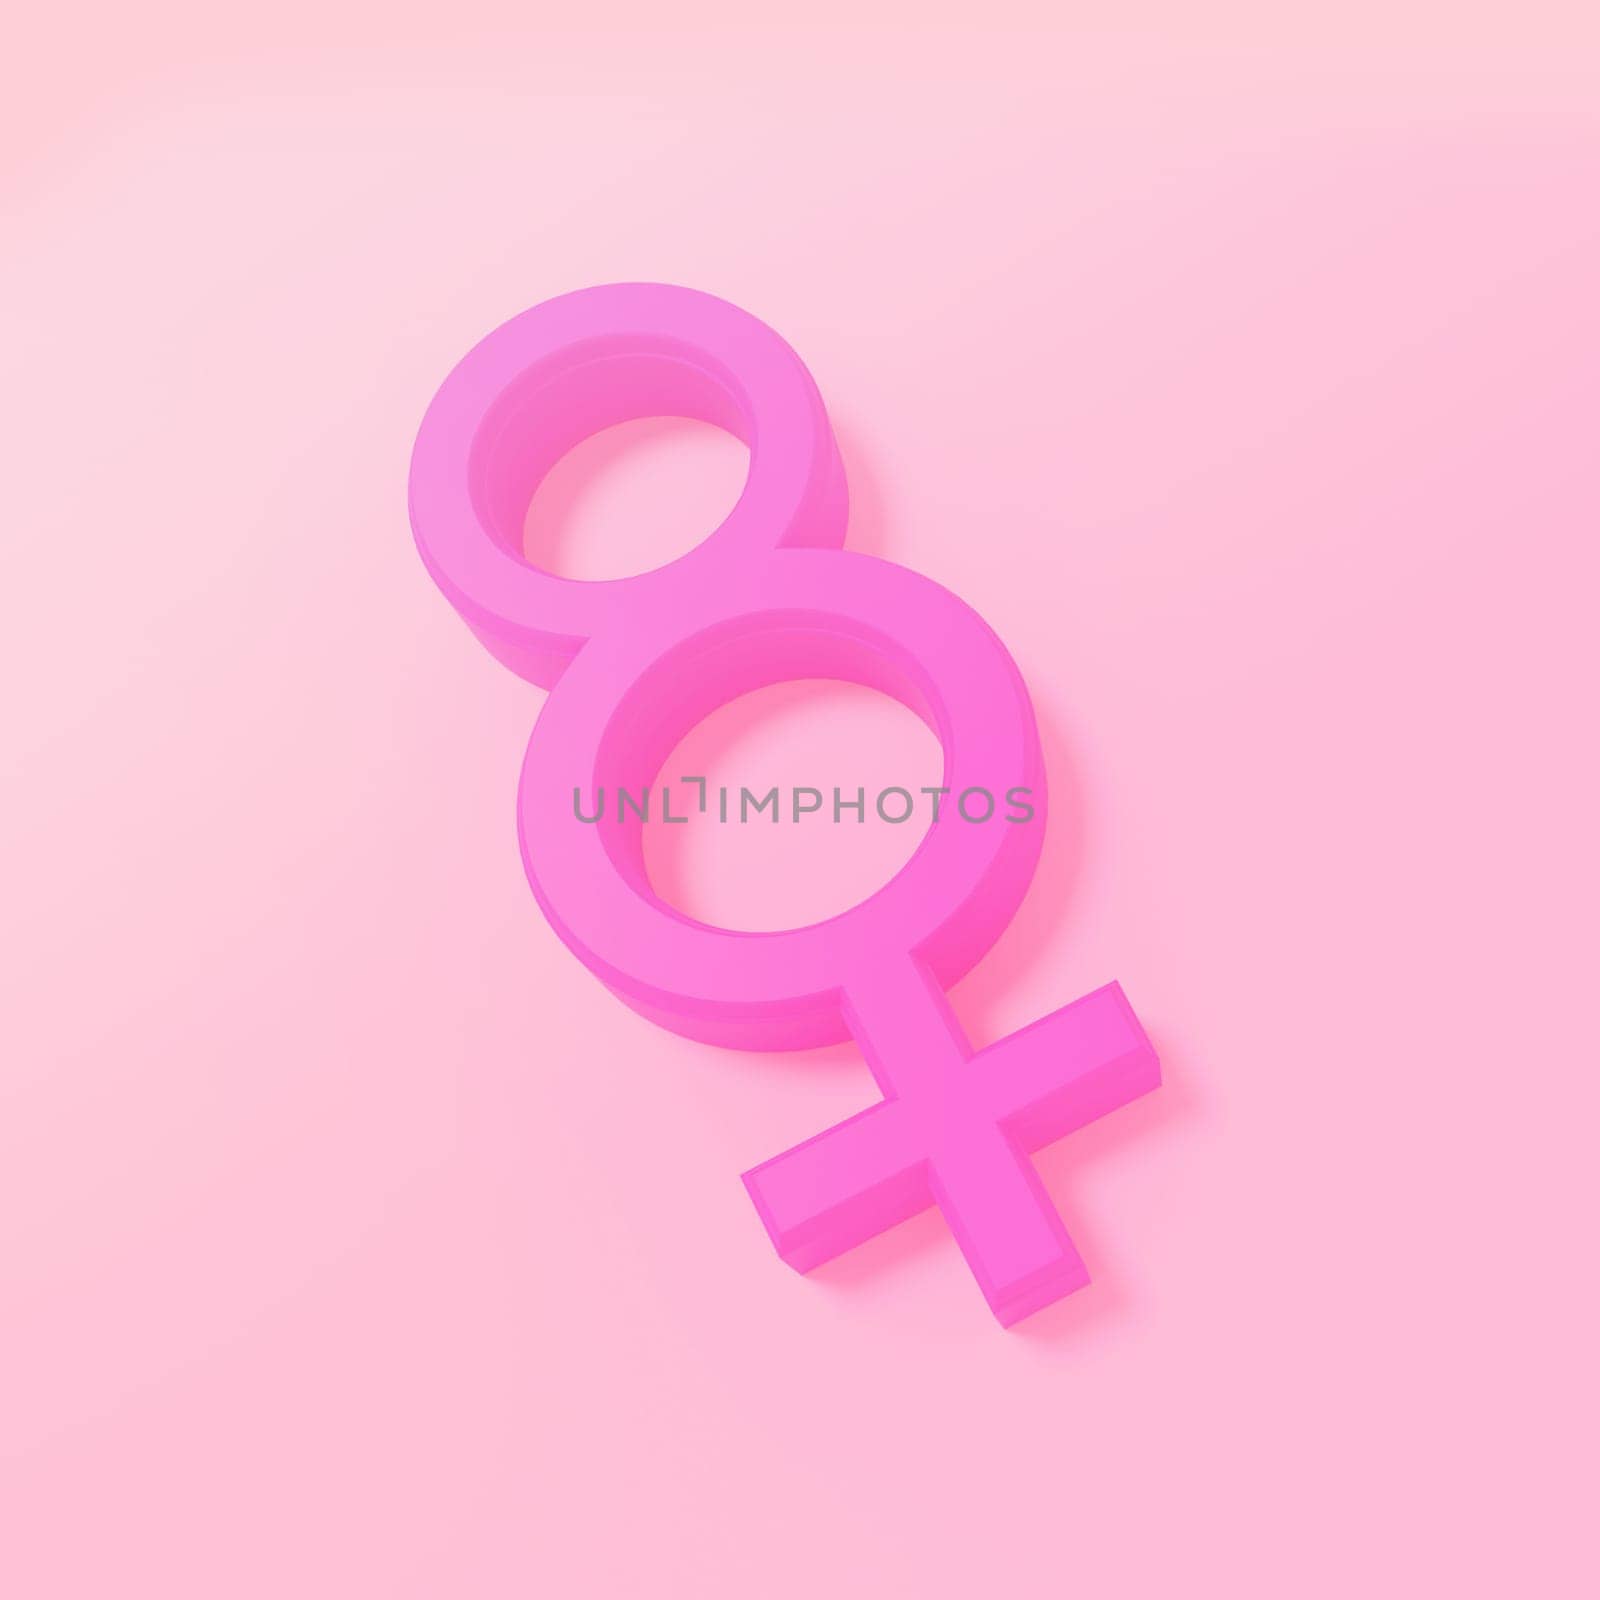 Celebration of women's day. Symbol of women. Eight sign on a purple background. Concept of women's rights, feminism and empowerment. 3D rendering.